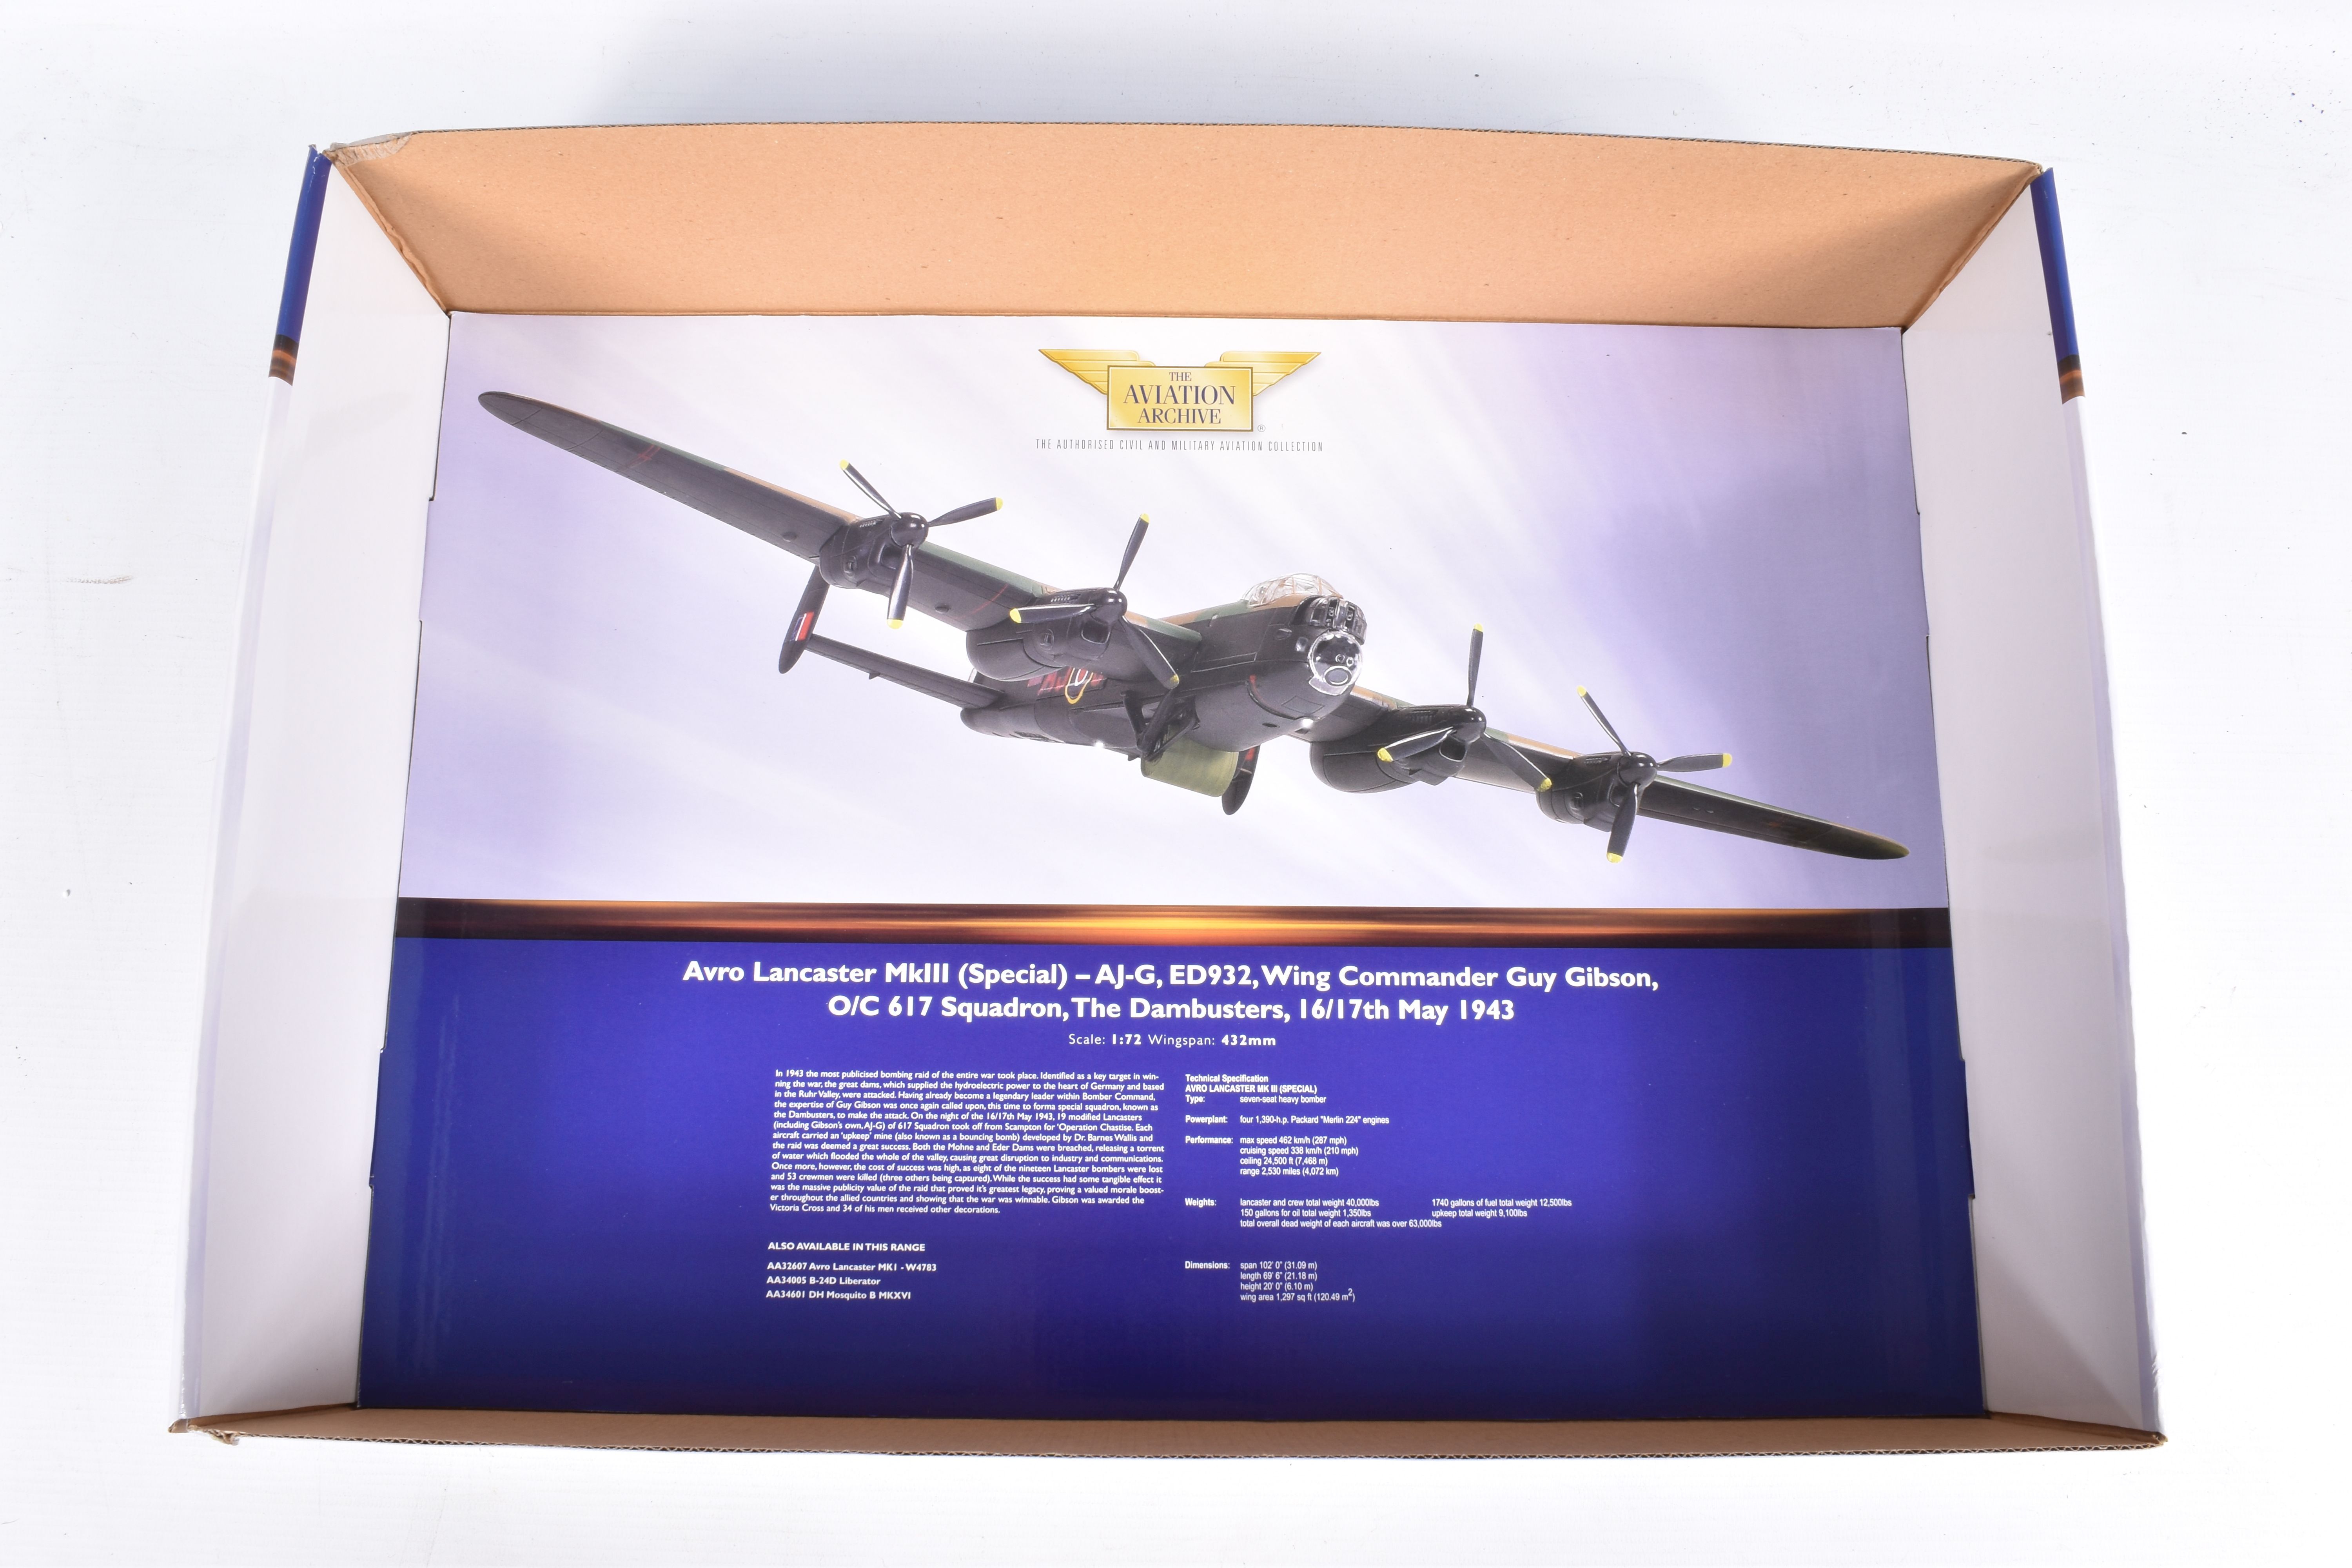 A BOXED LIMITED EDITION CORGI AVIATION ARCHIVE WORLD WAR II BOMBERS ON THE HORIZON AVRO LANCASTER - Image 2 of 4